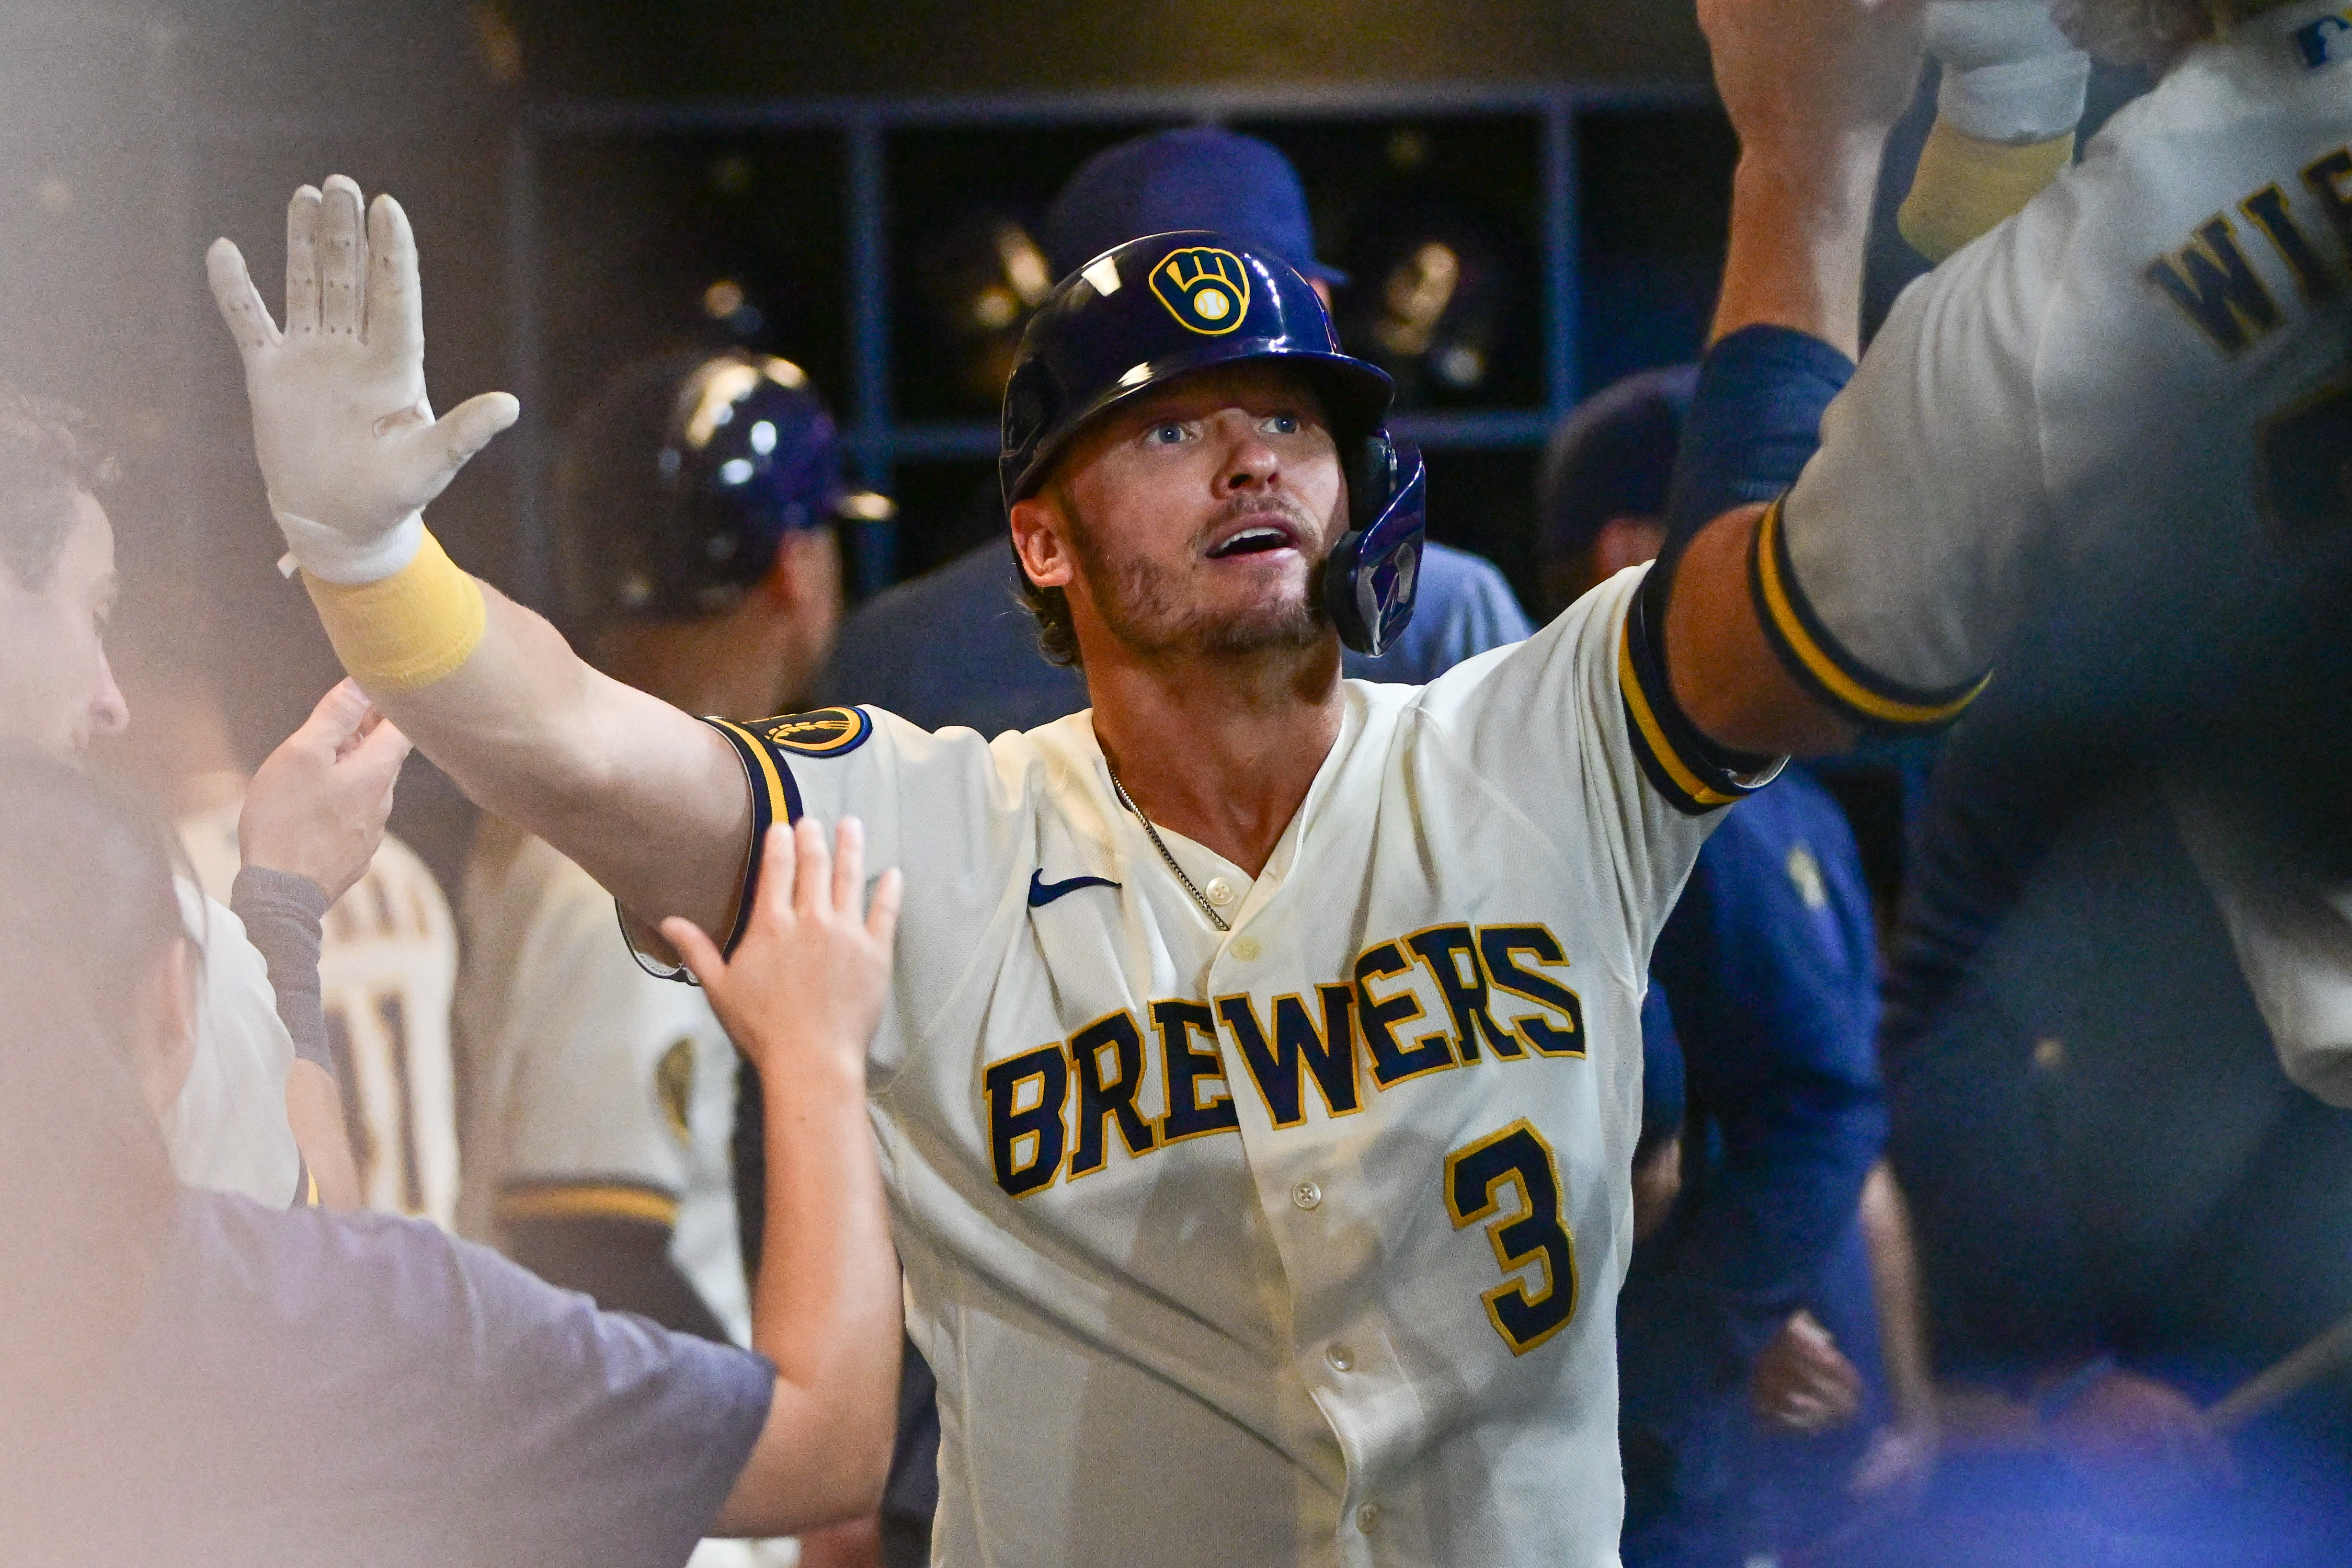 Why did the Brewers sign Josh Donaldson? NL Central leaders add